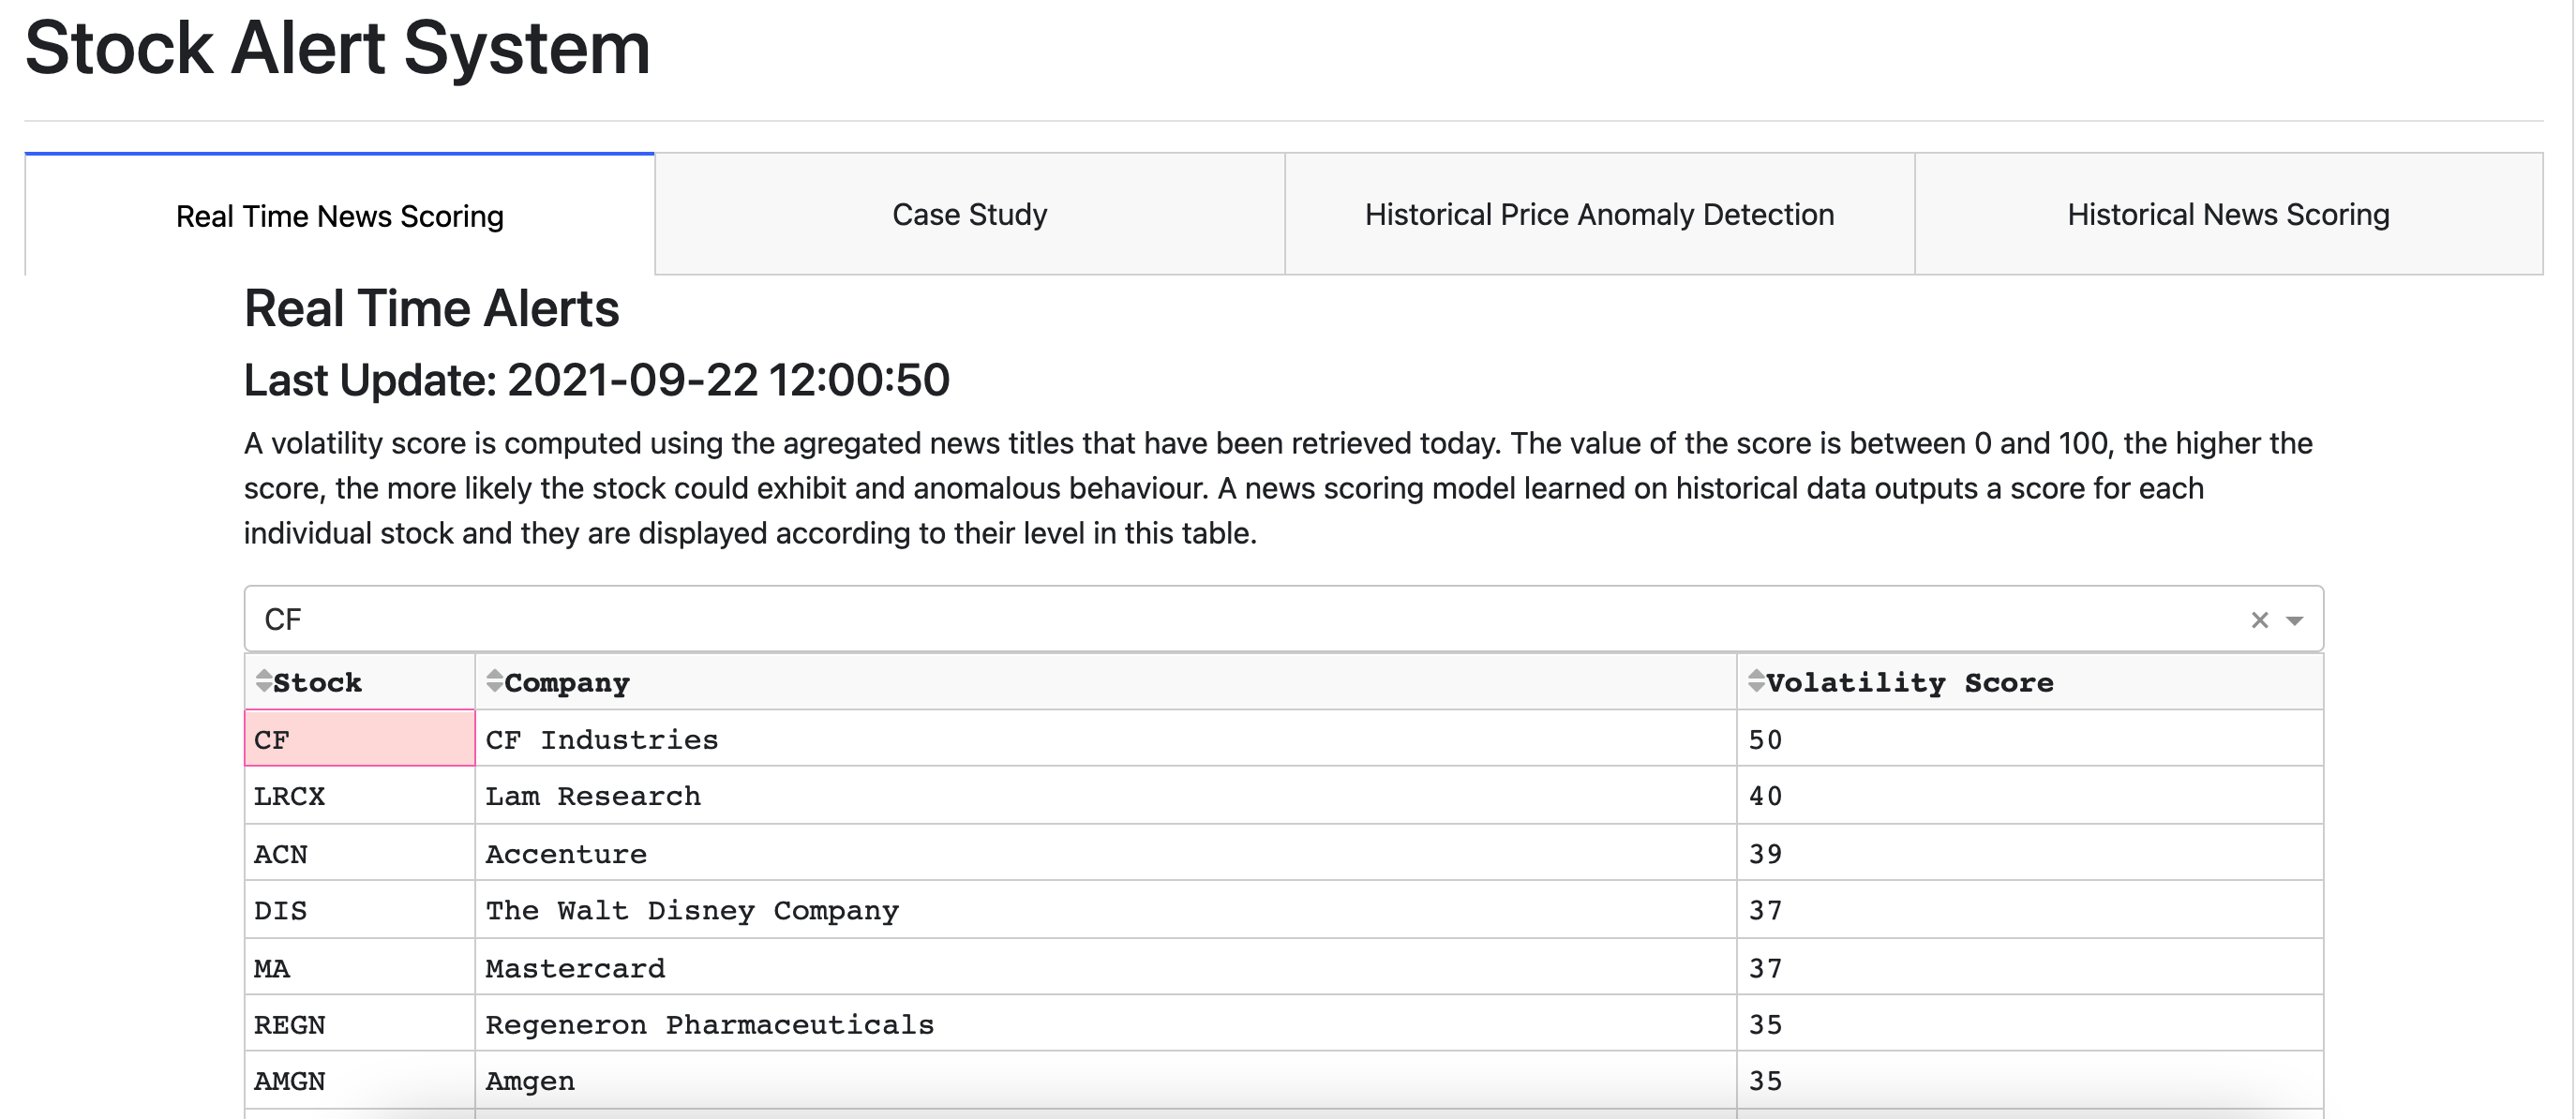 Dataiku screenshot of the final project WebApp that can be used to observe changes in stock prices and news events.